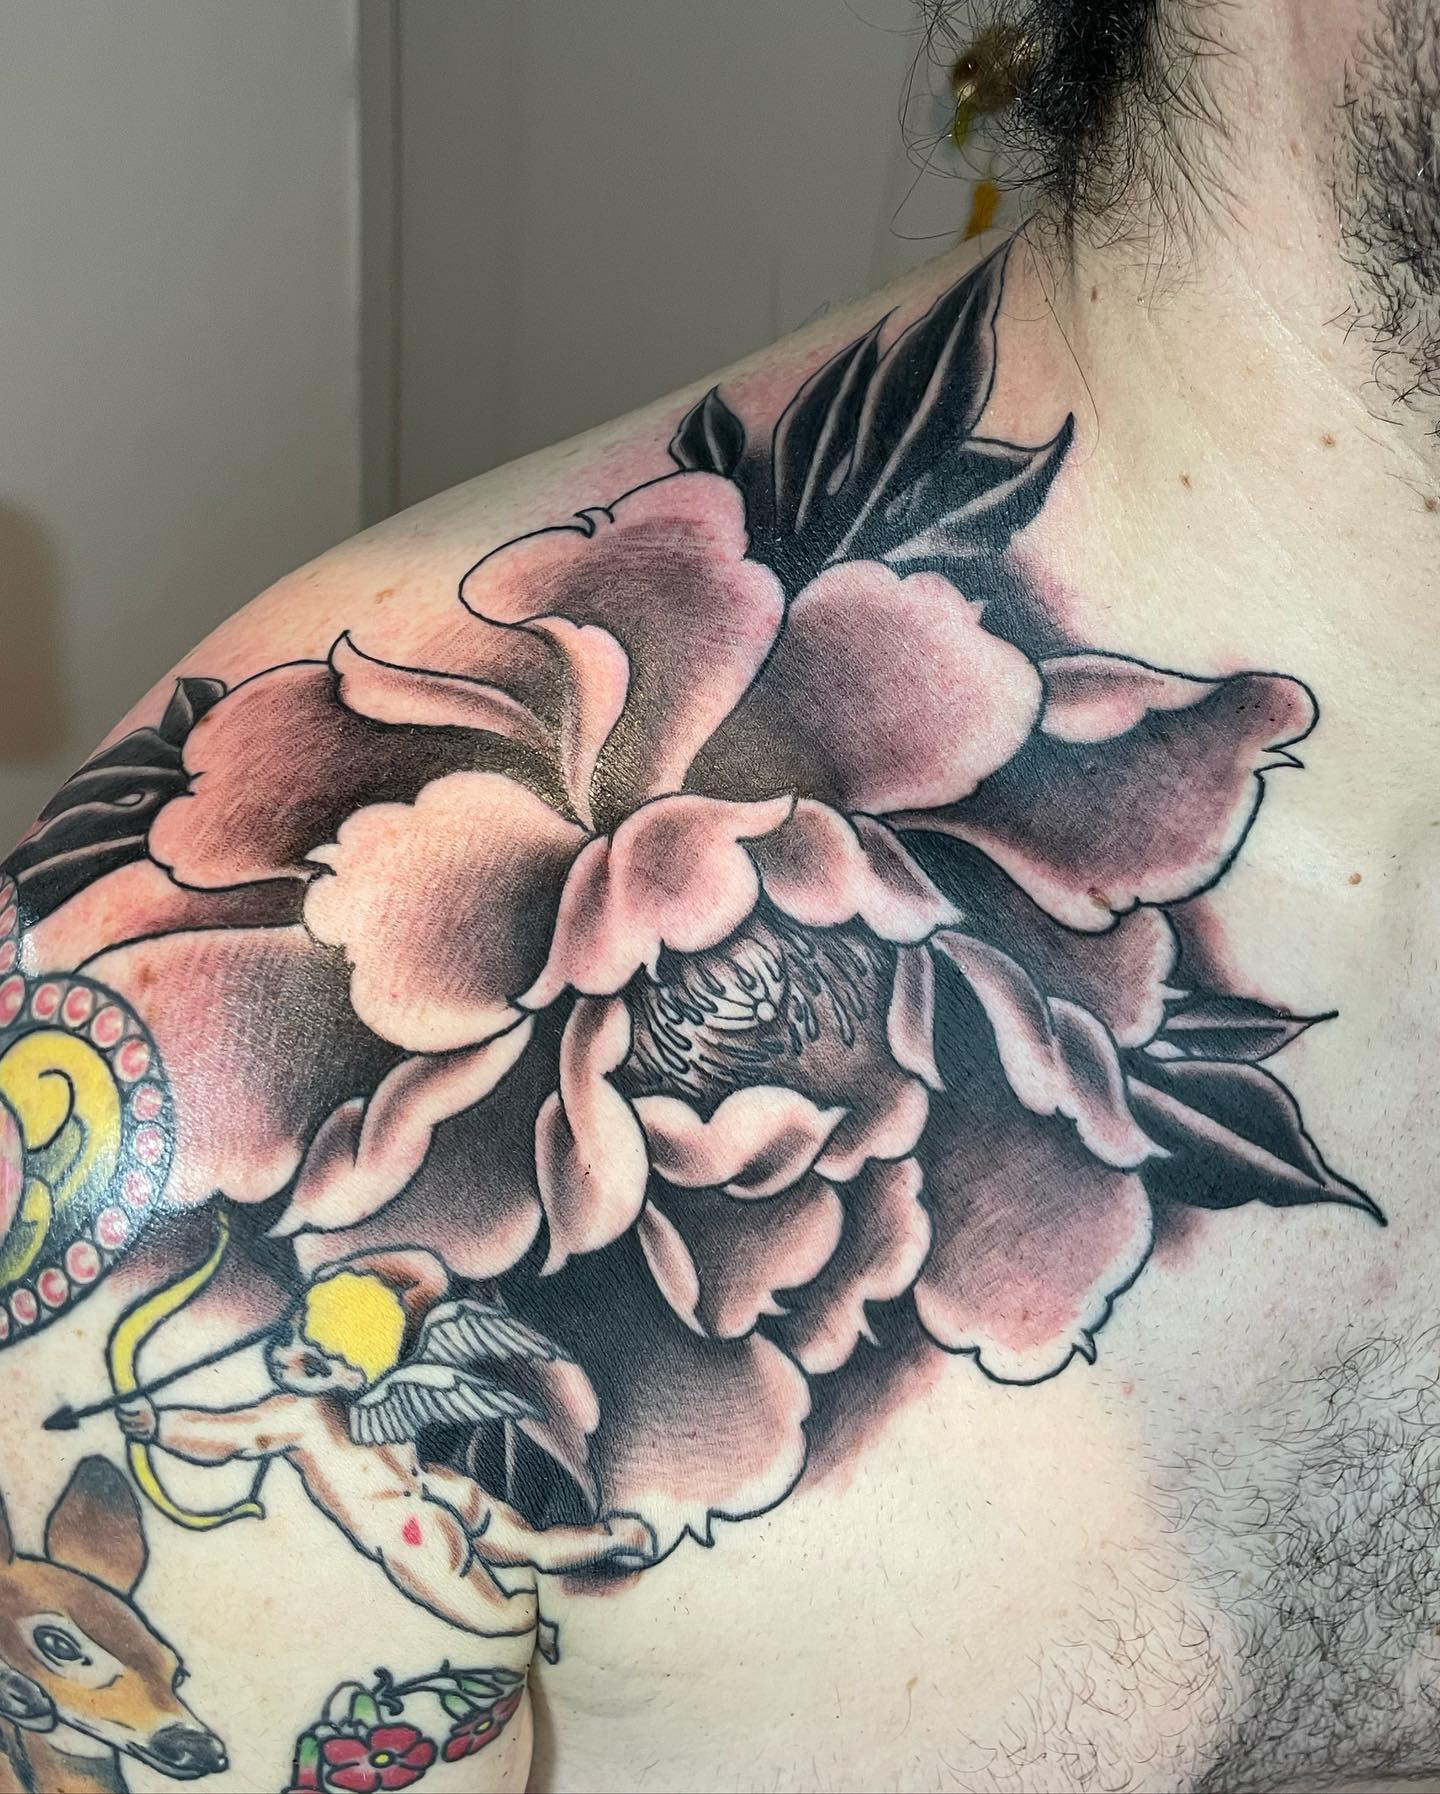 If you really trust your tattoo artist why not give it a go with this giant and feminine flower? Those who fancy bigger and more dramatic ideas will fancy this feminine concept.